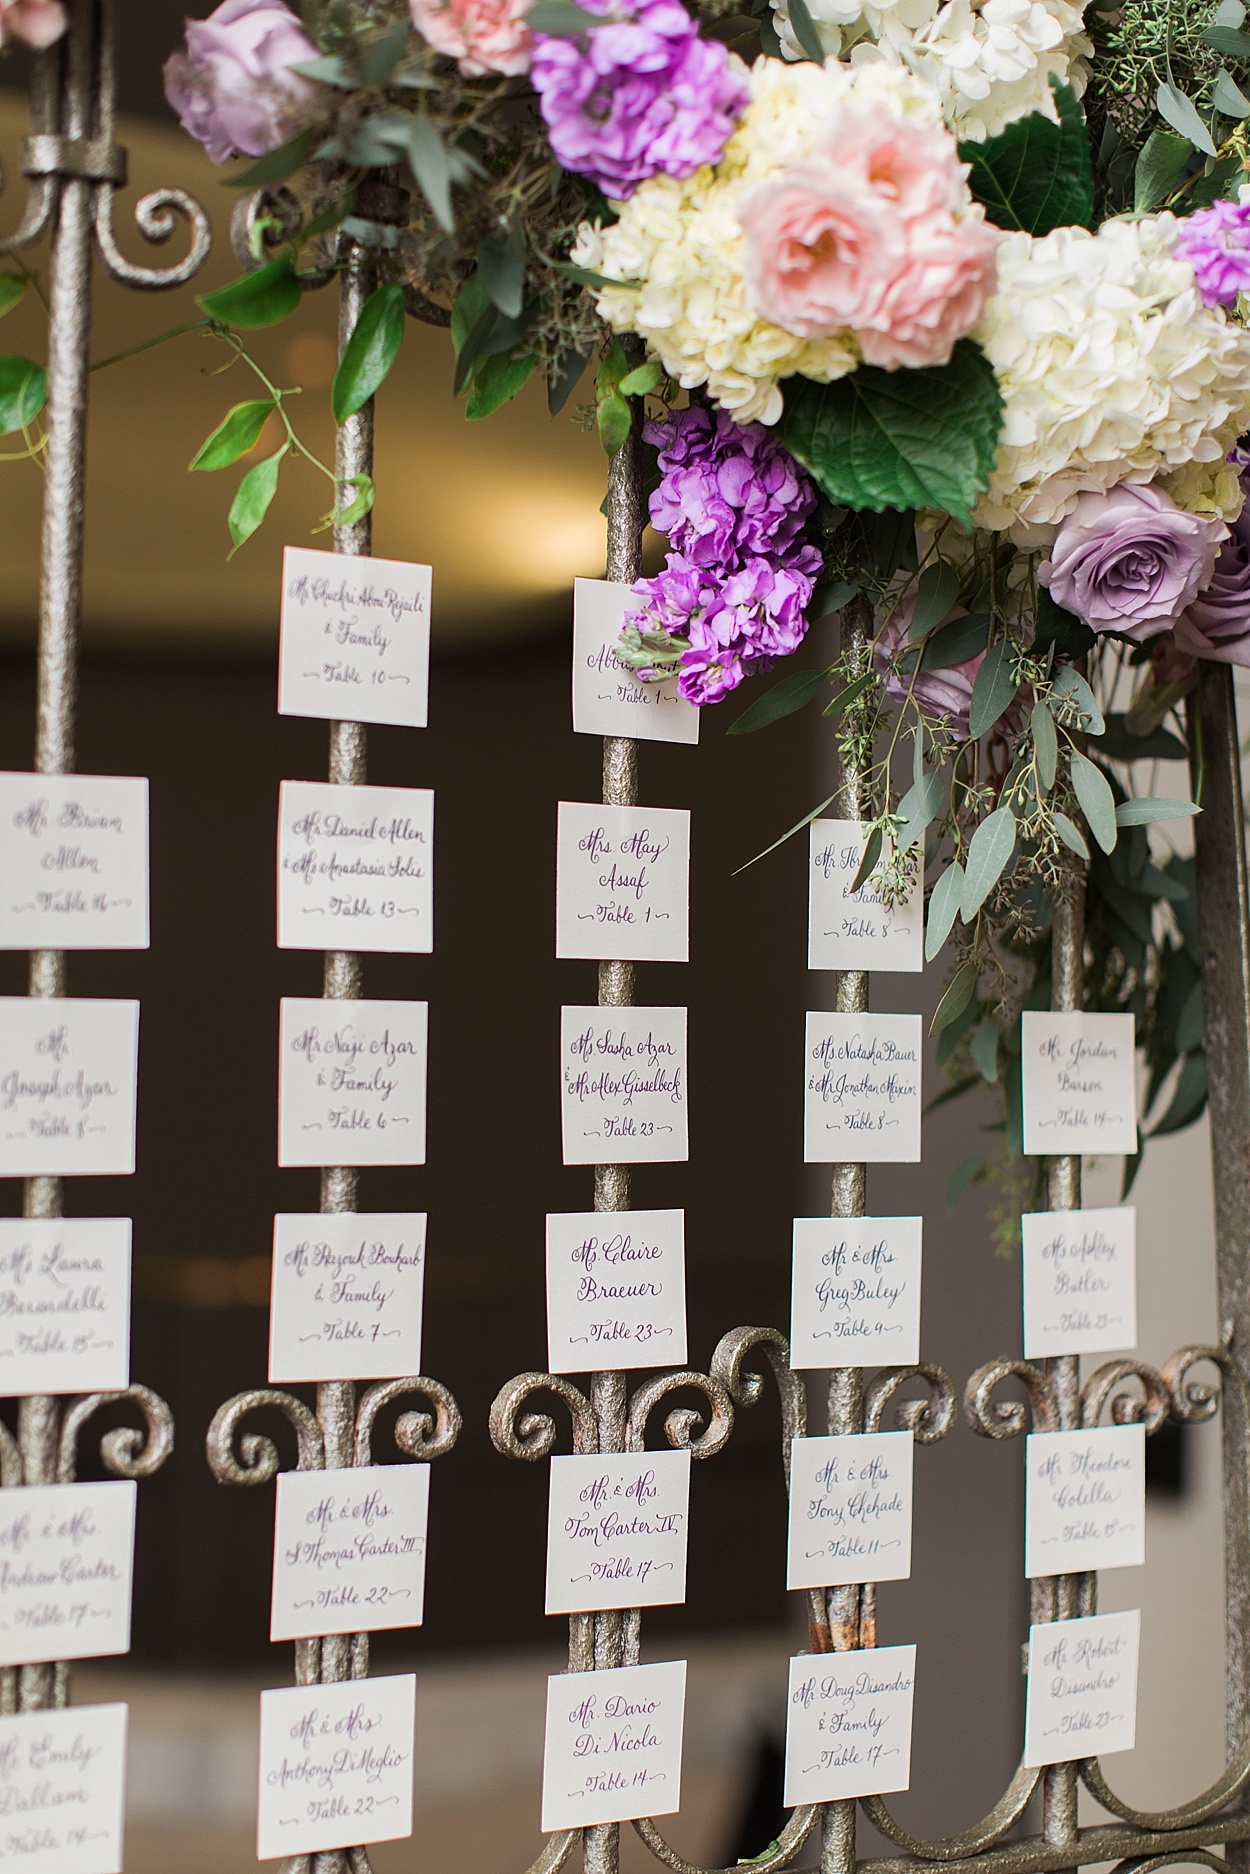 Blush & purple wedding at National Museum of Women in the Arts | Abby Grace Photography